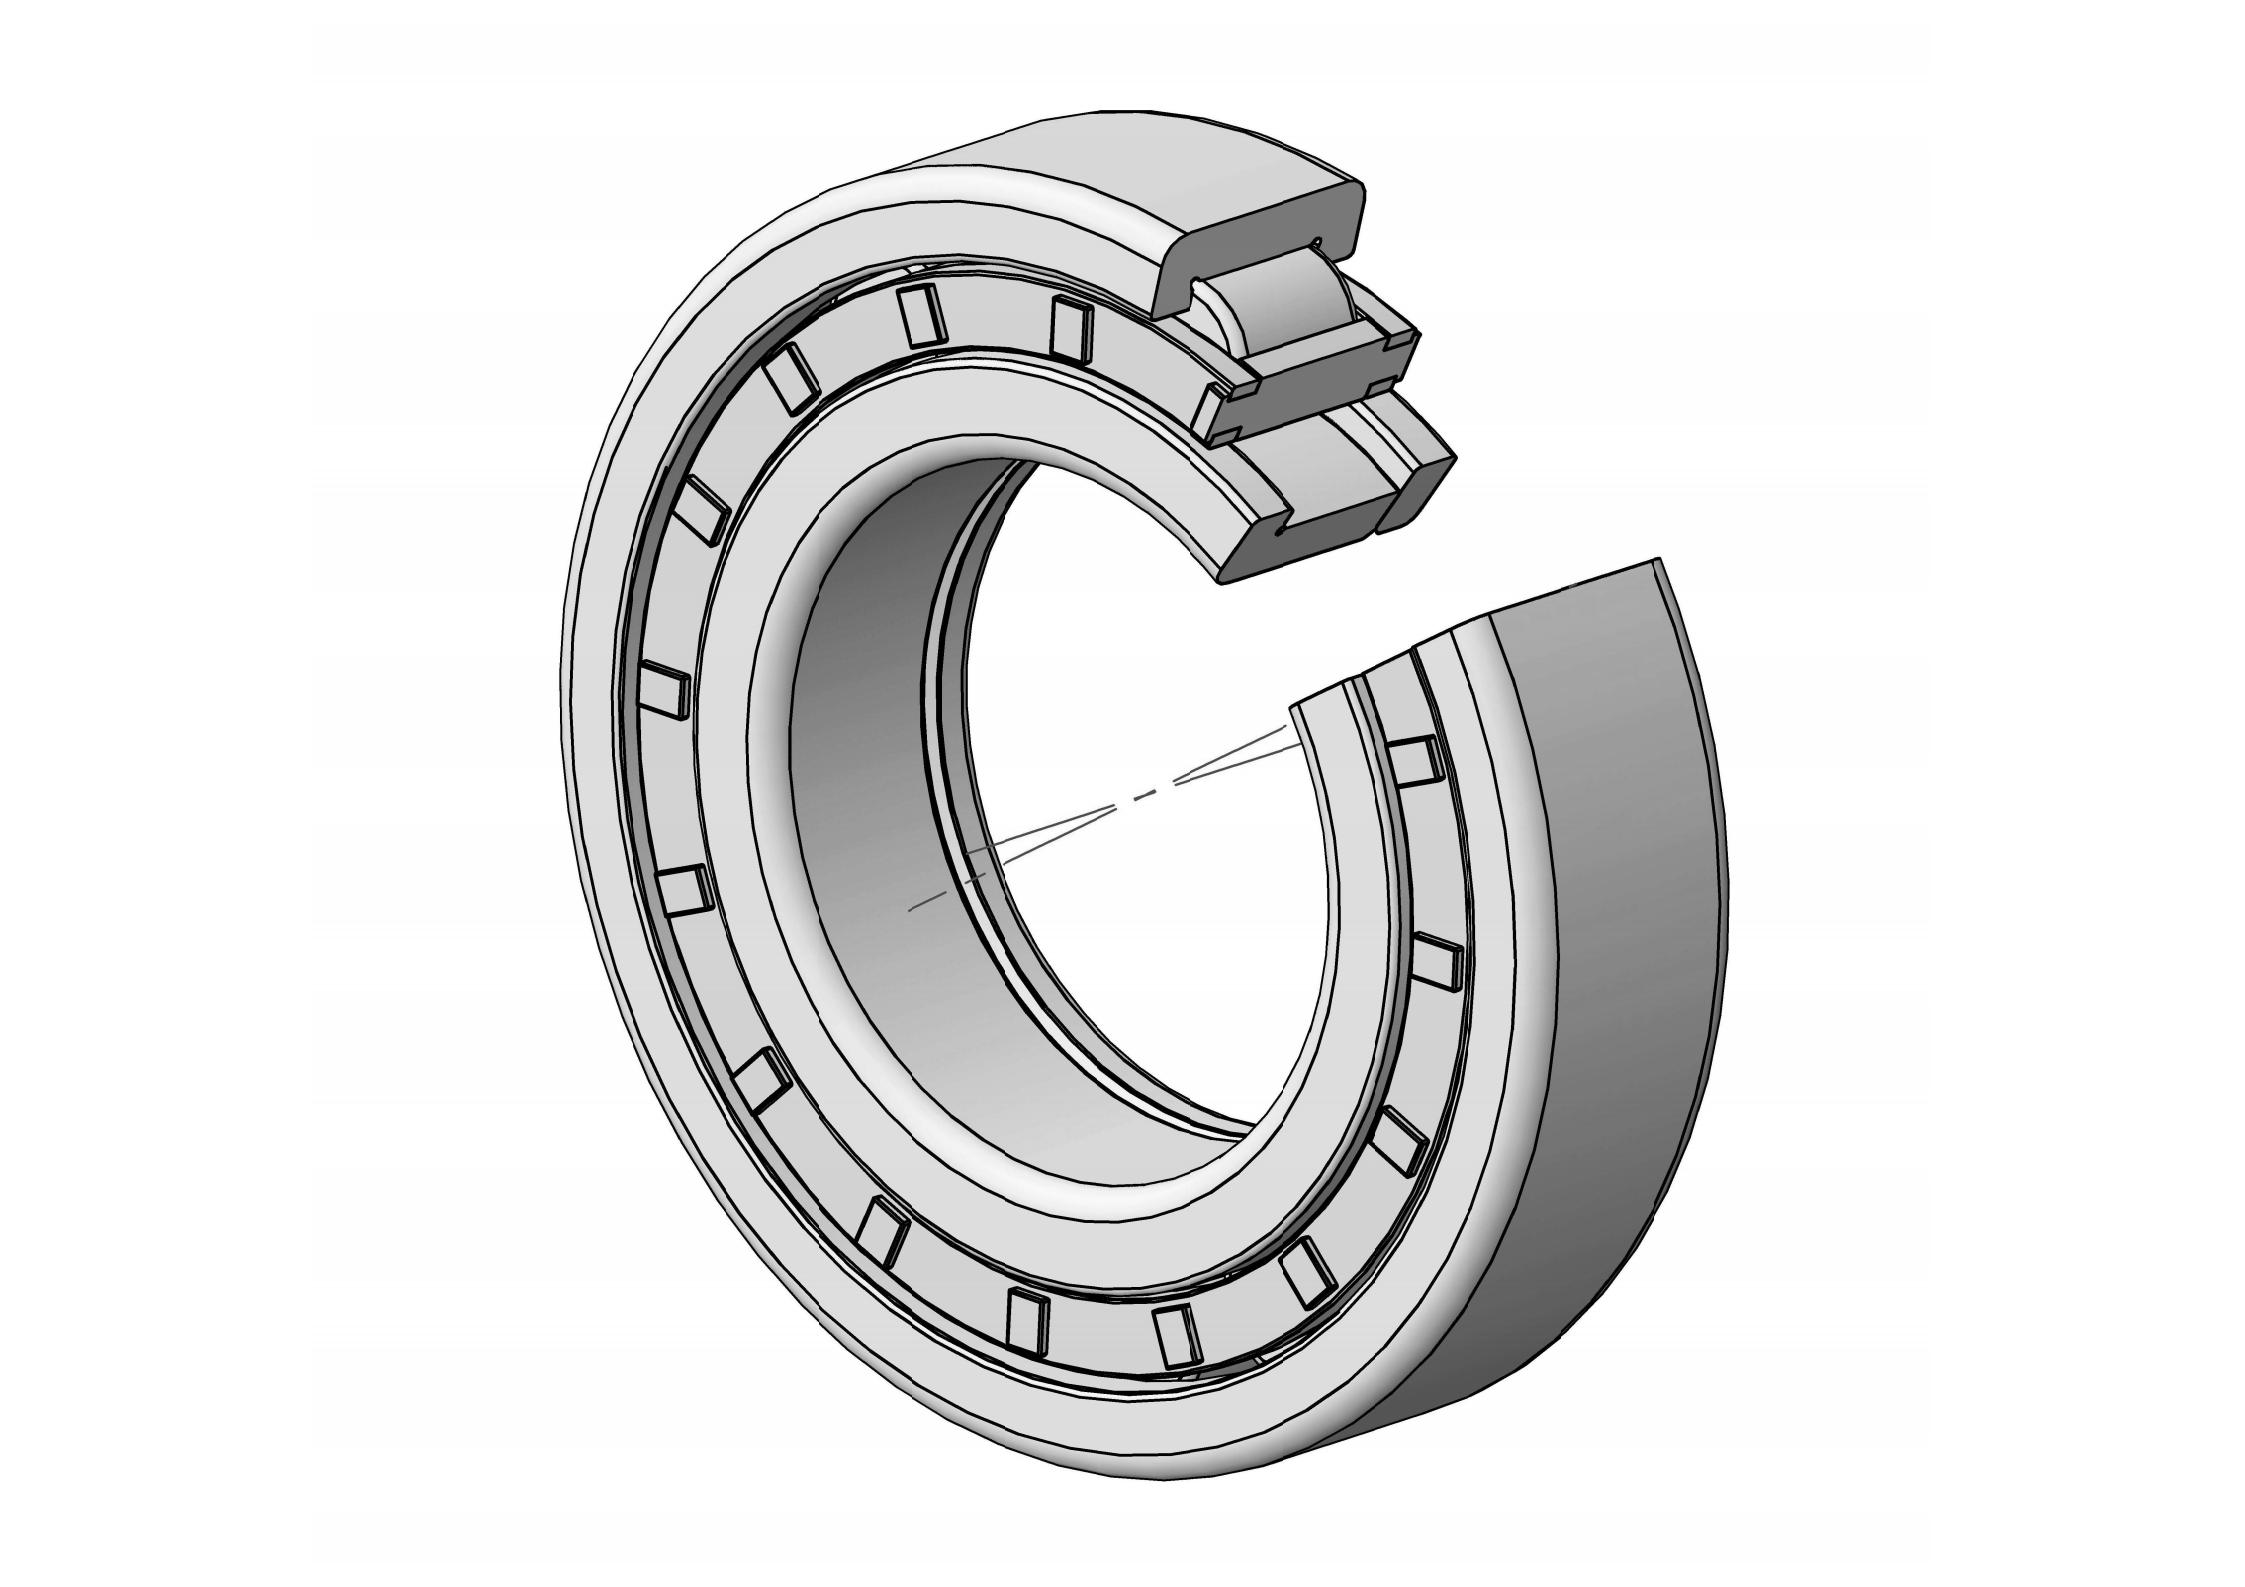  NUP222-EM Single Row Cylindrical roller bearing 